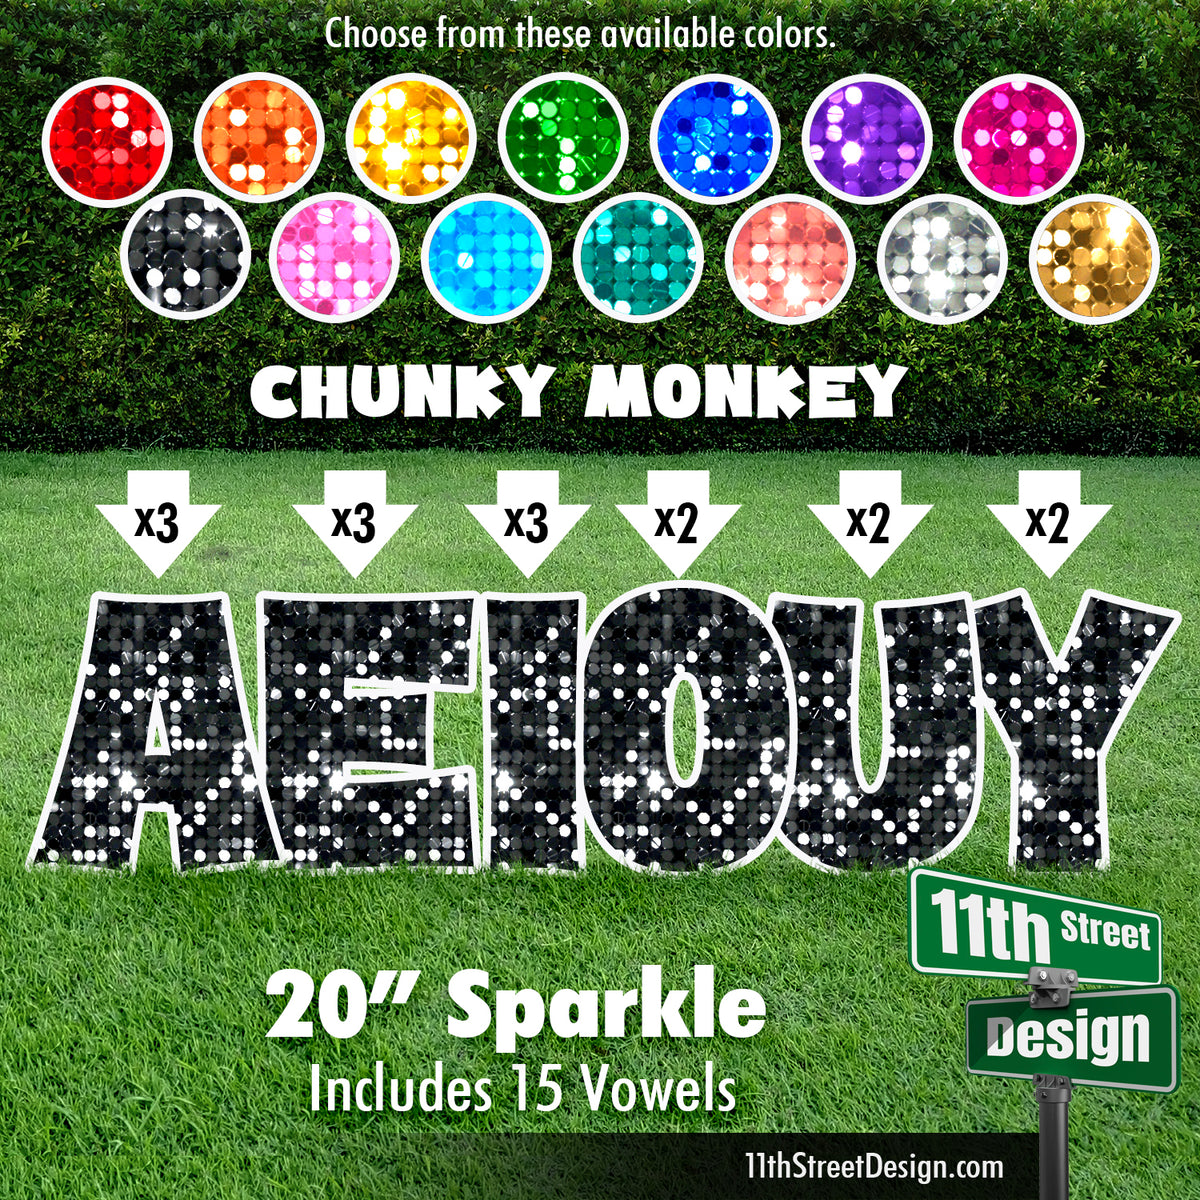 Sparkle 20&quot; Chunky Monkey Yard Card Set Includes 15 Vowels